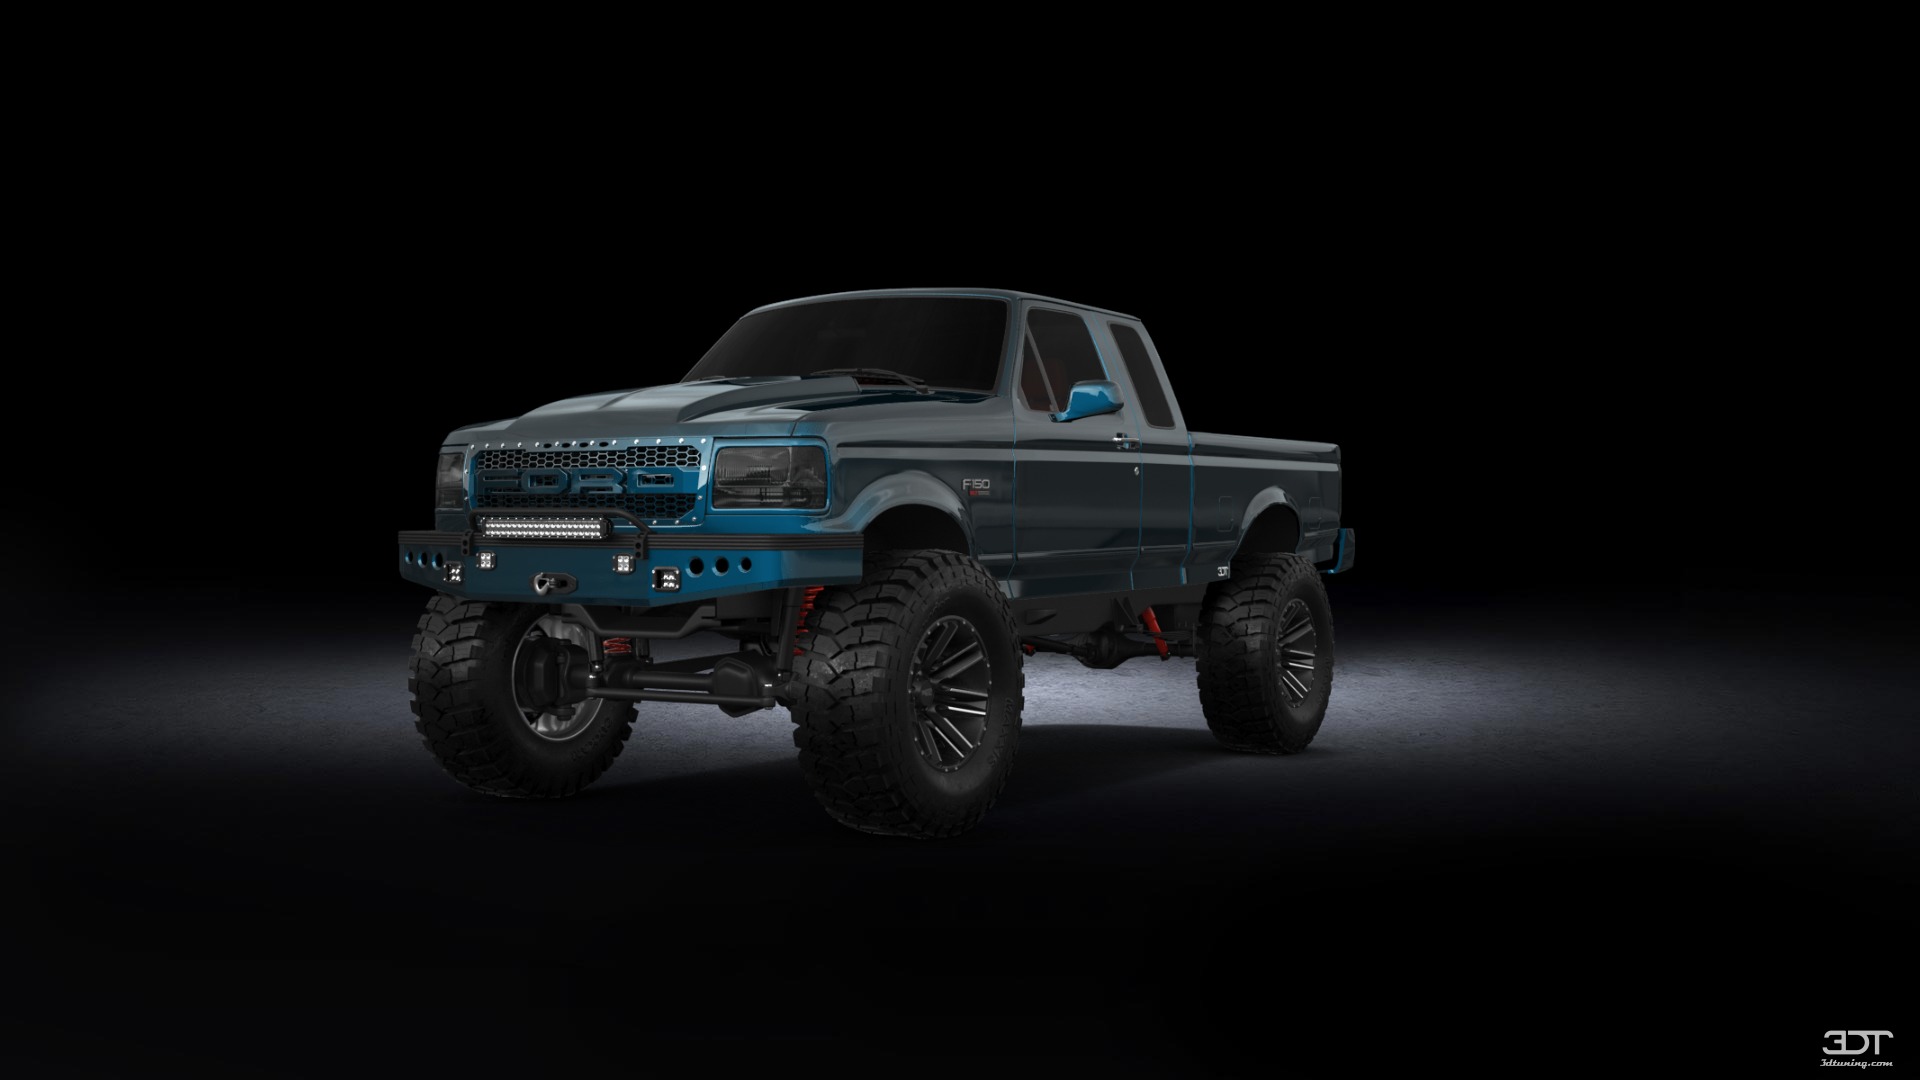 Ford F-150 SuperCab 2 Door pickup truck 1993